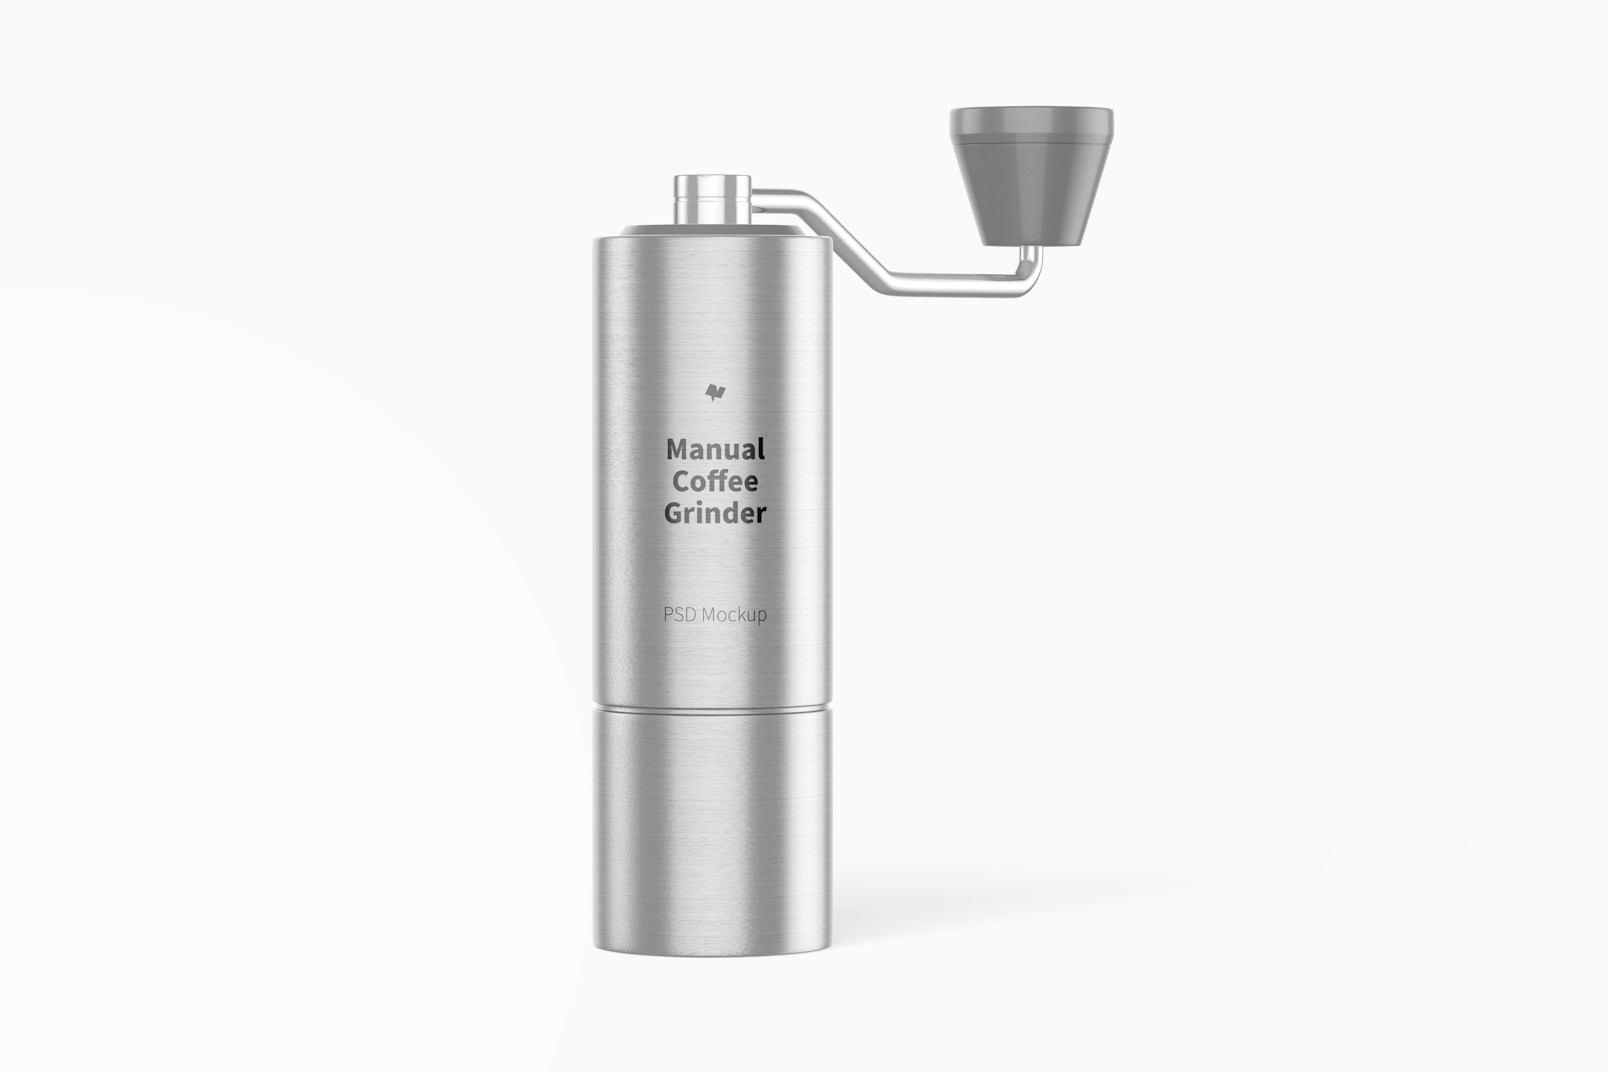 Manual Coffee Grinder Mockup, Front View